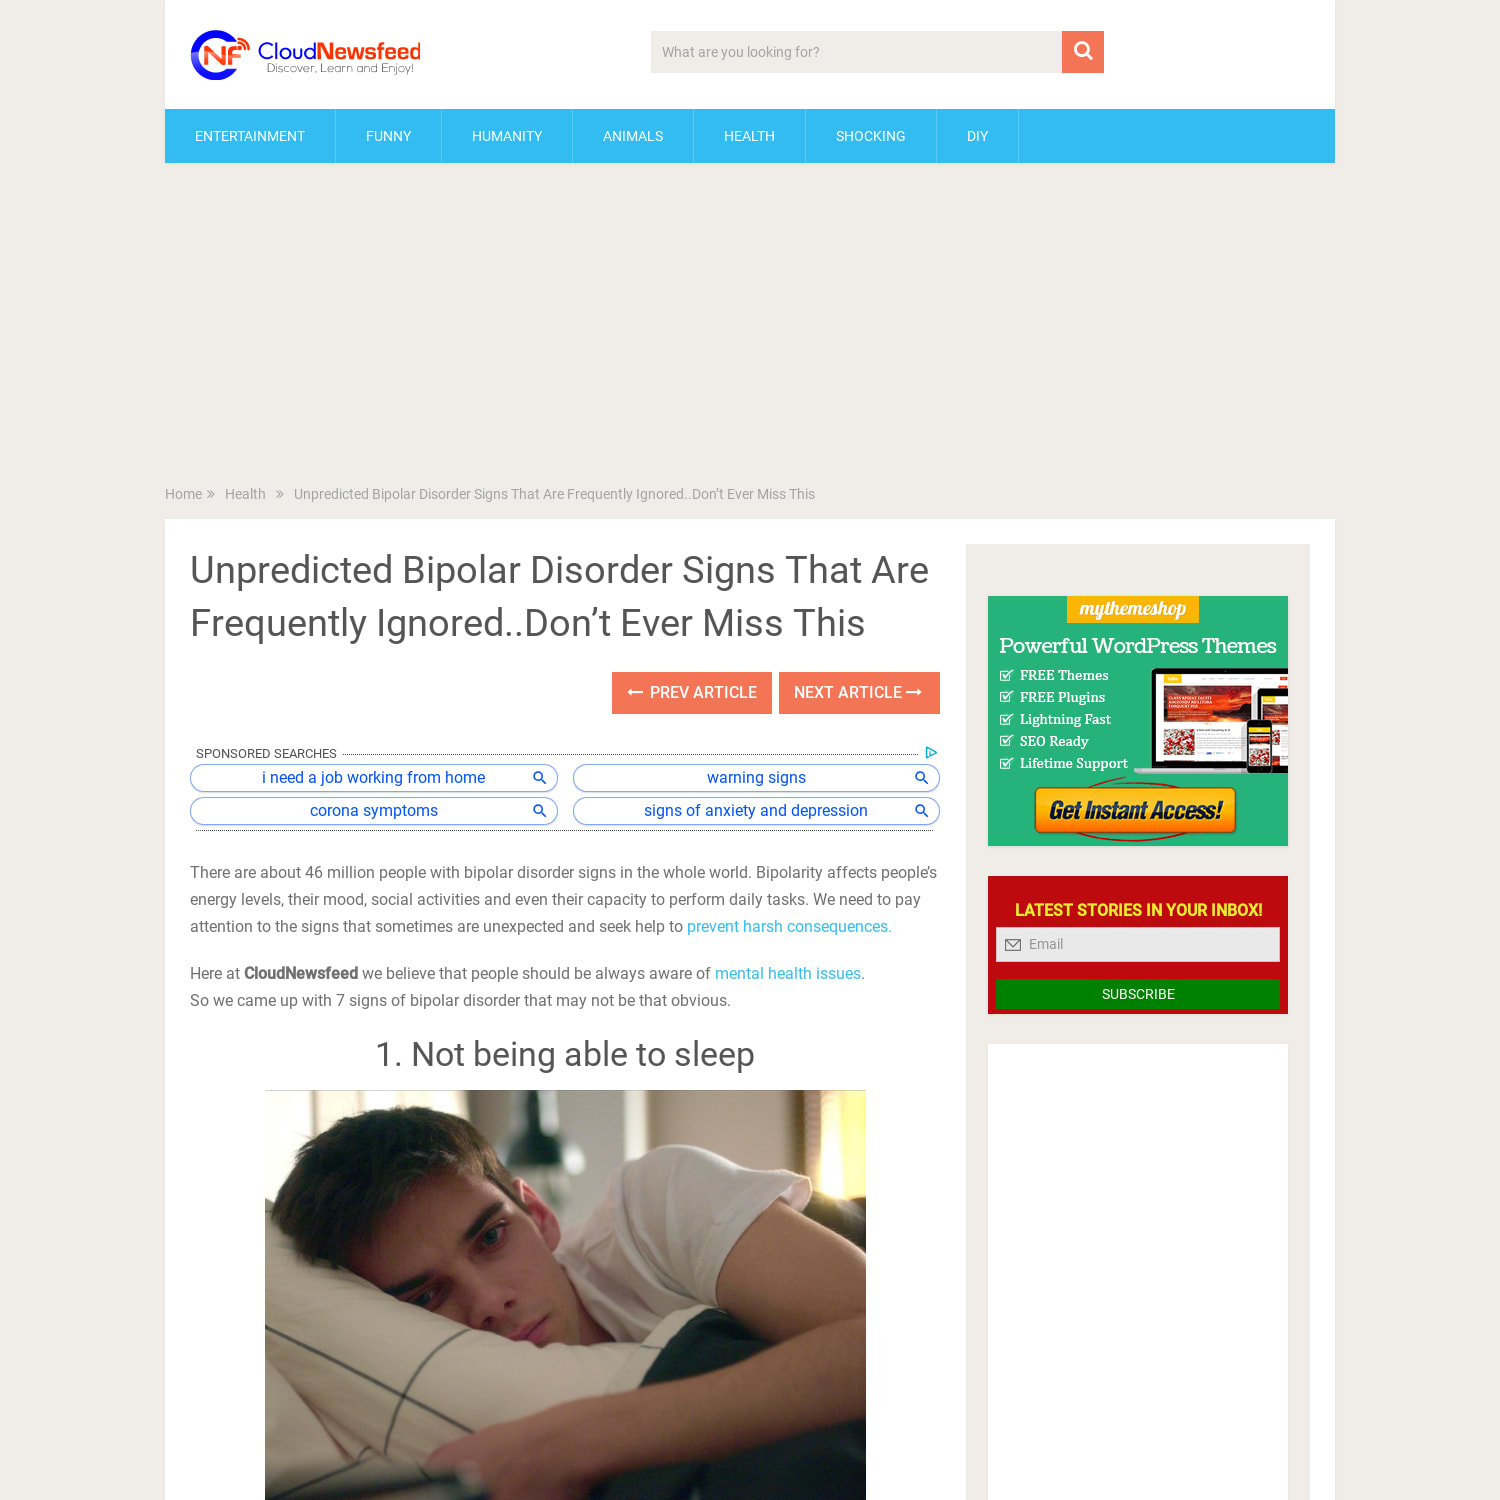 Unpredicted Bipolar Disorder Signs That Are Frequently Ignored